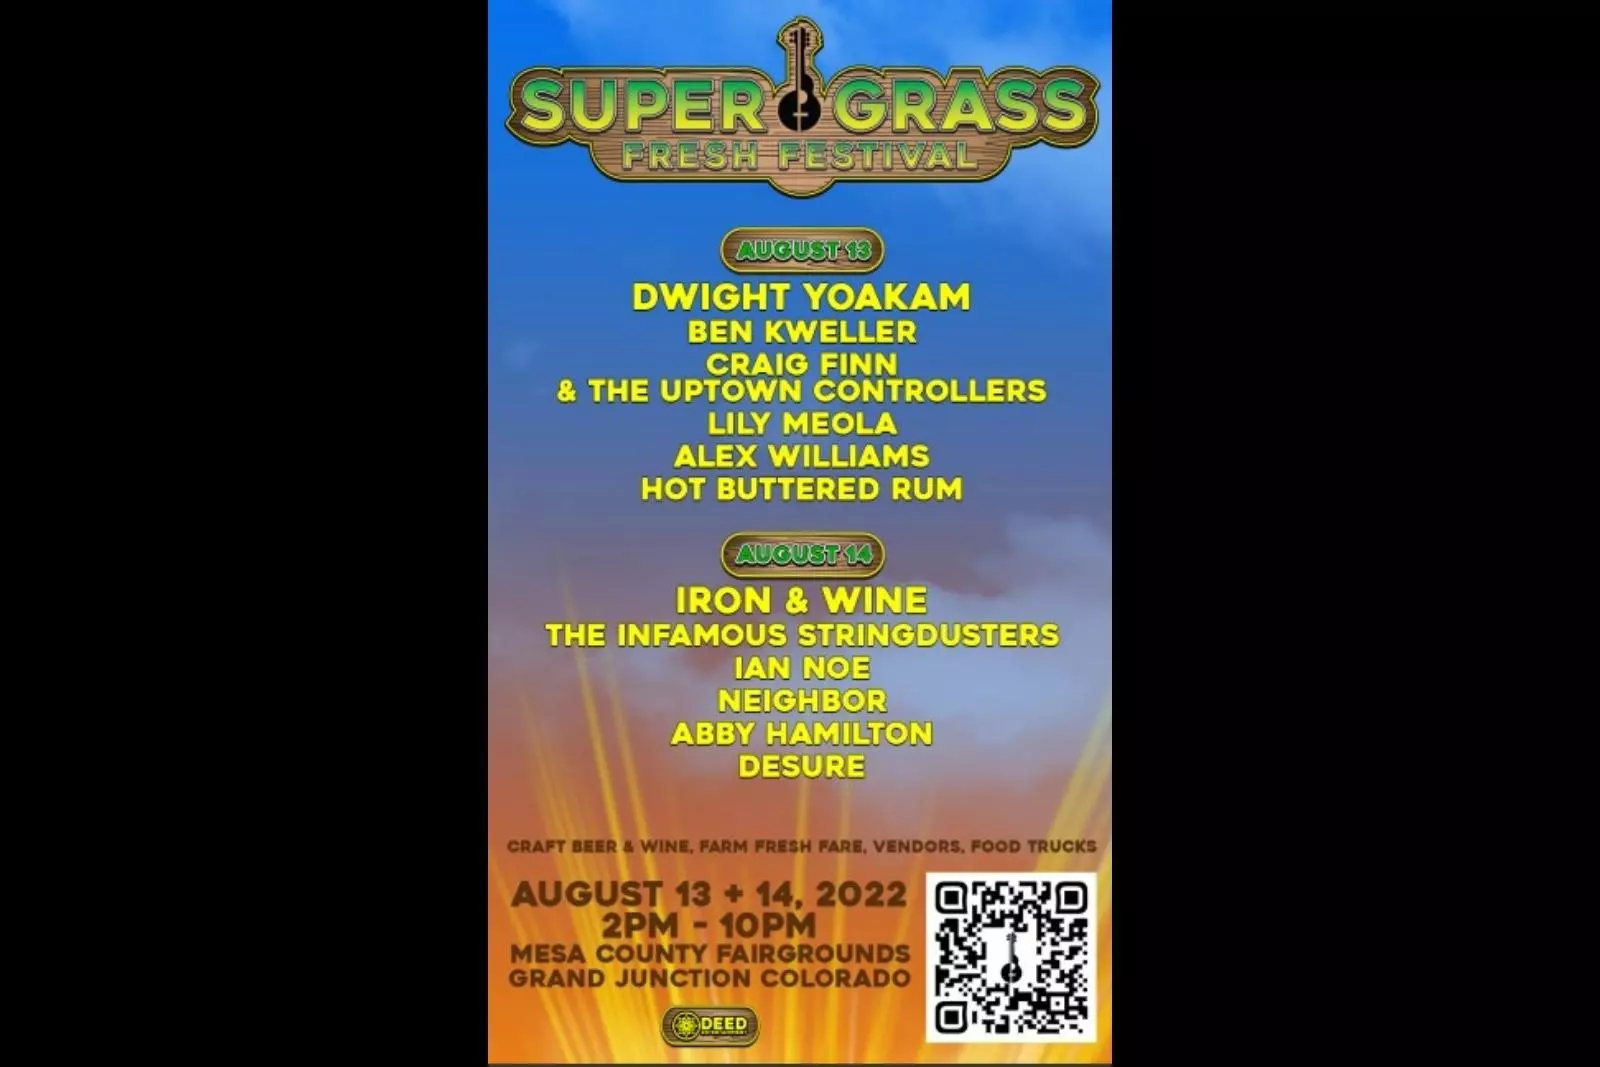 Super Grass Fresh Fest is Coming to Grand Junction, Colorado